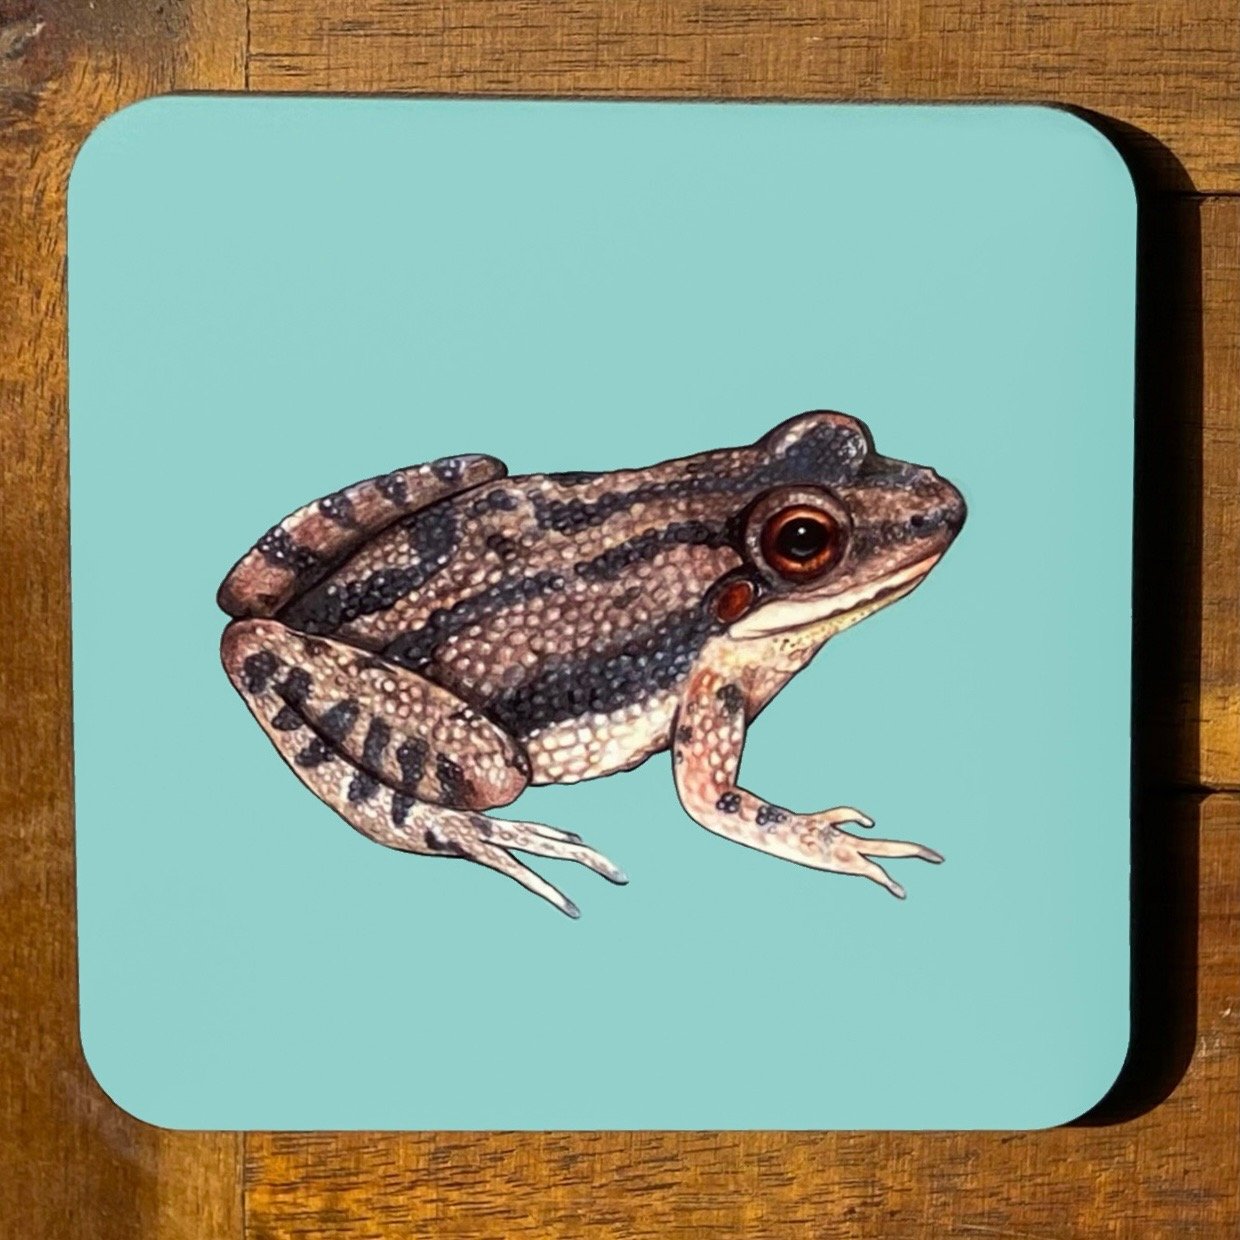 Frog and Toad Coasters (Individuals)